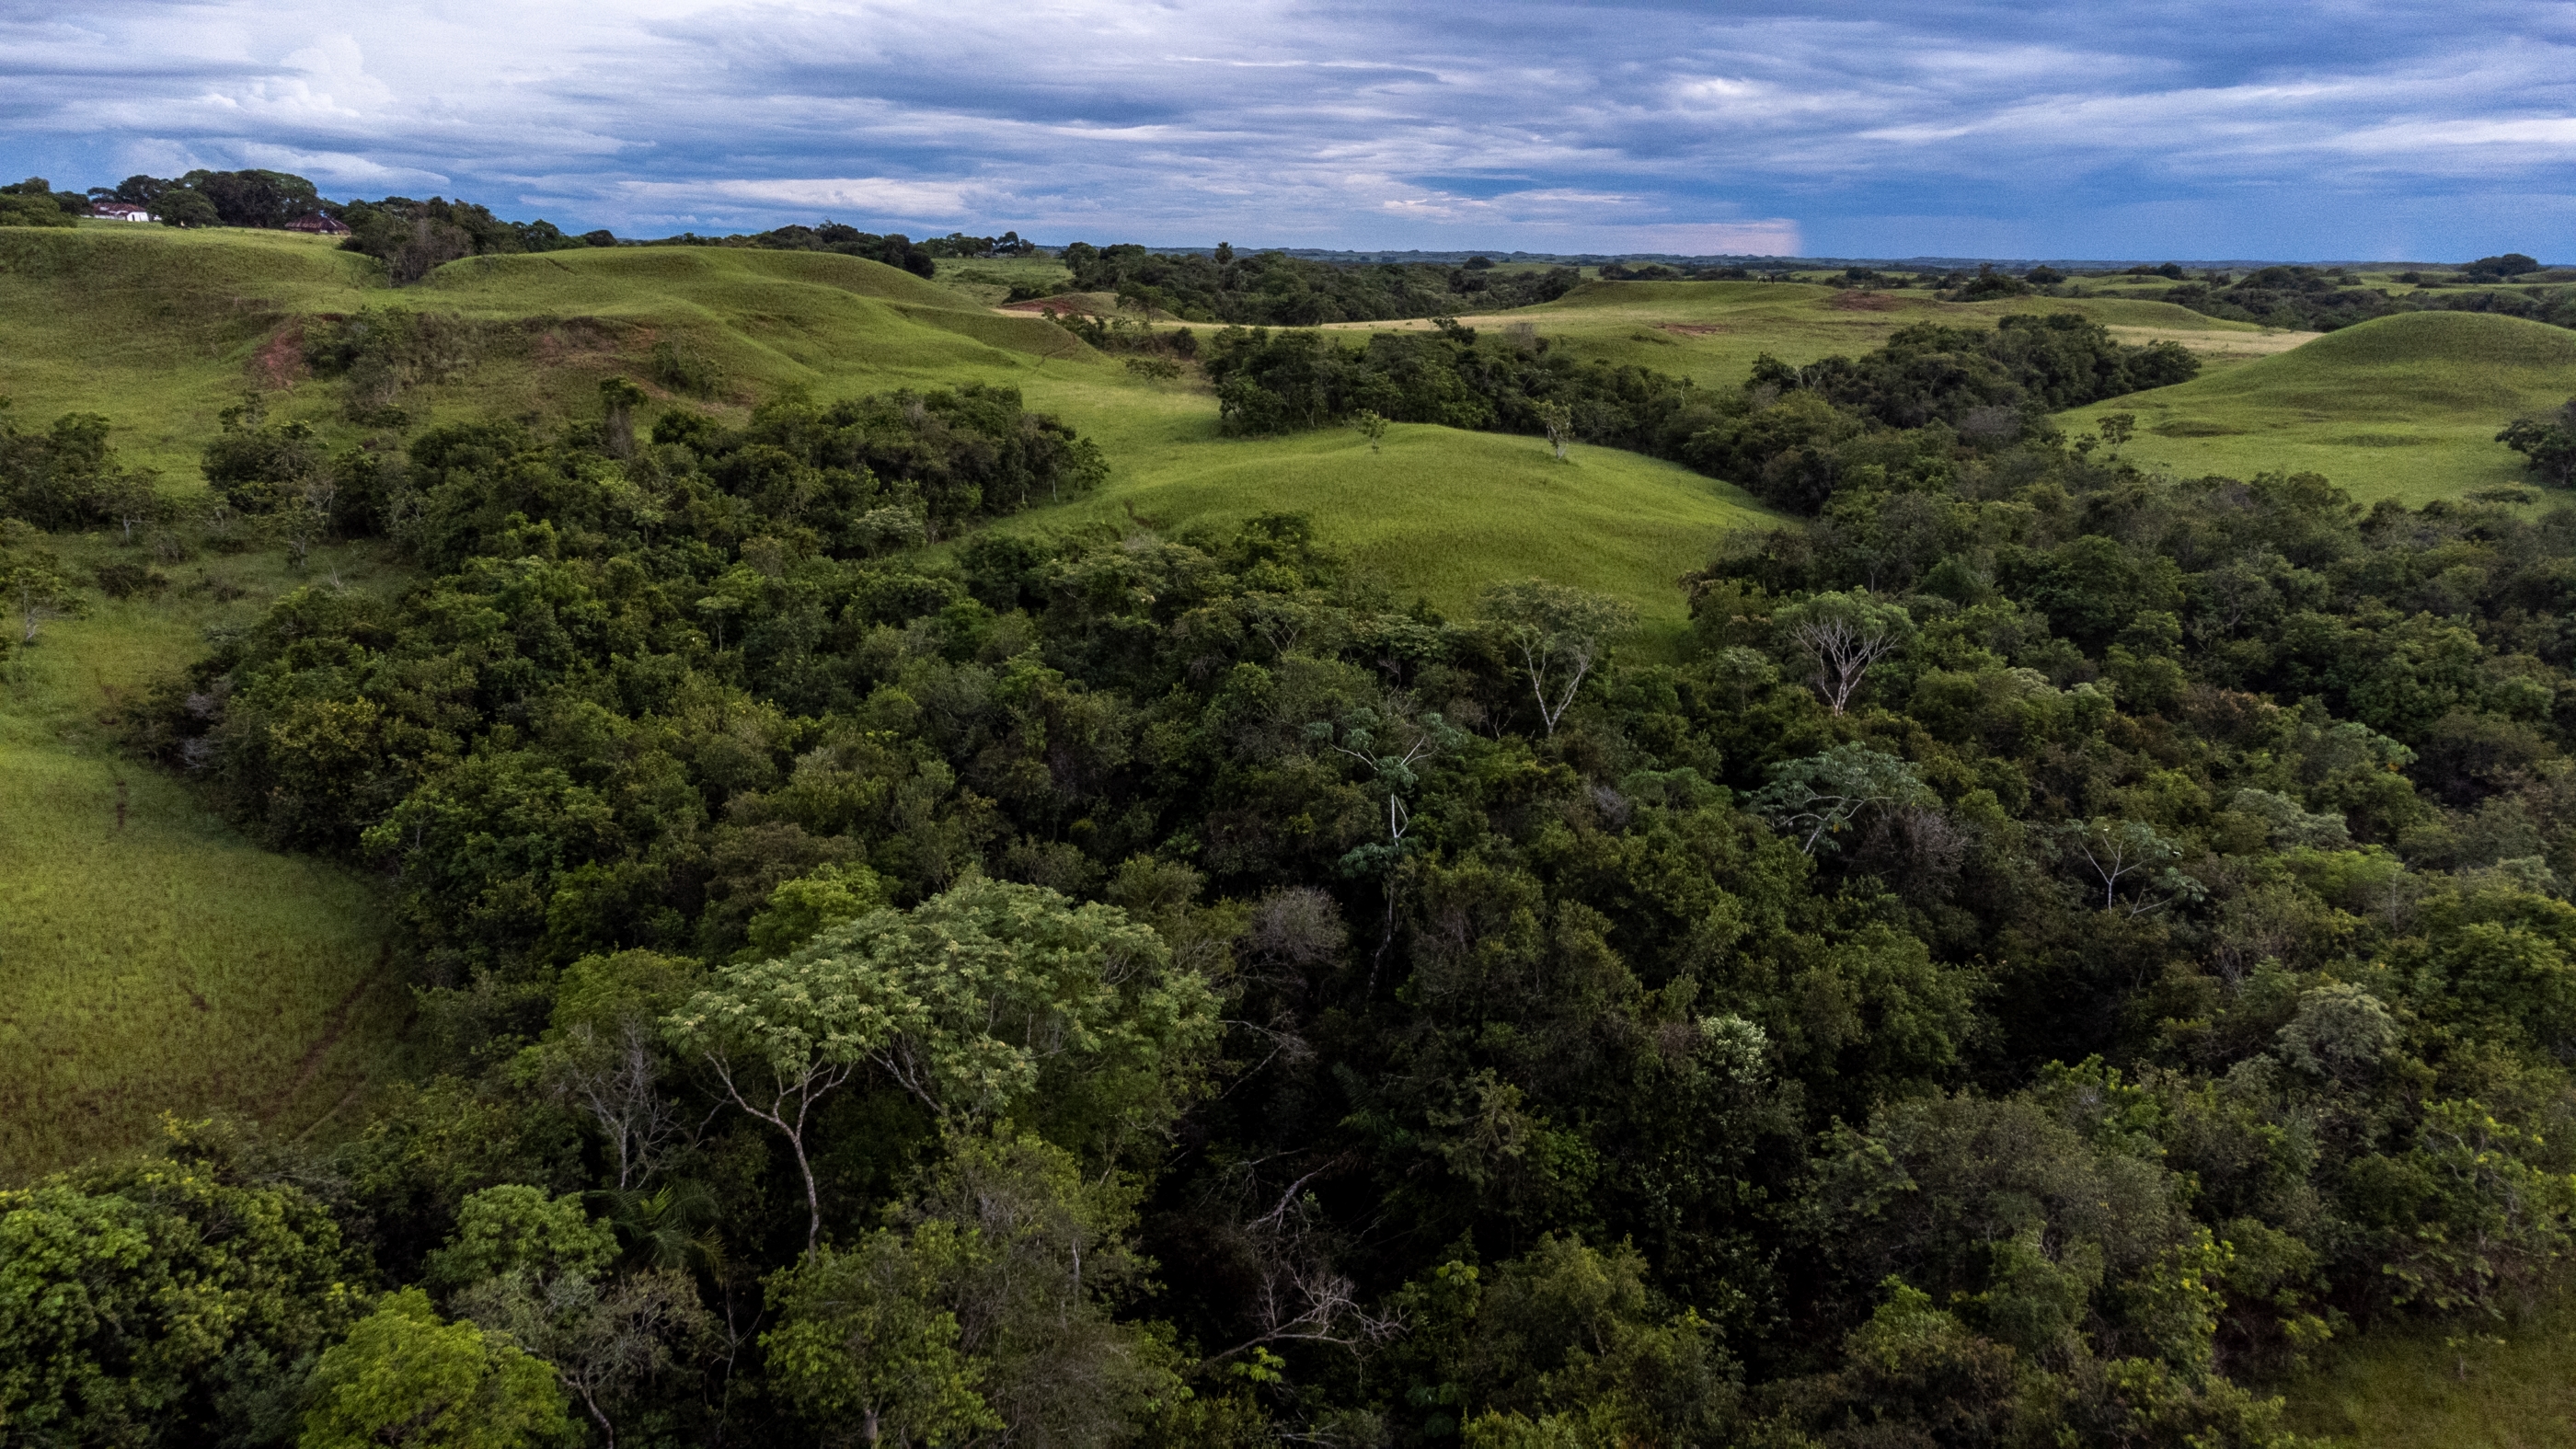 The tropical savannas of Manacacías and Orinoquia provide an important link between
the Andes and the Amazon.